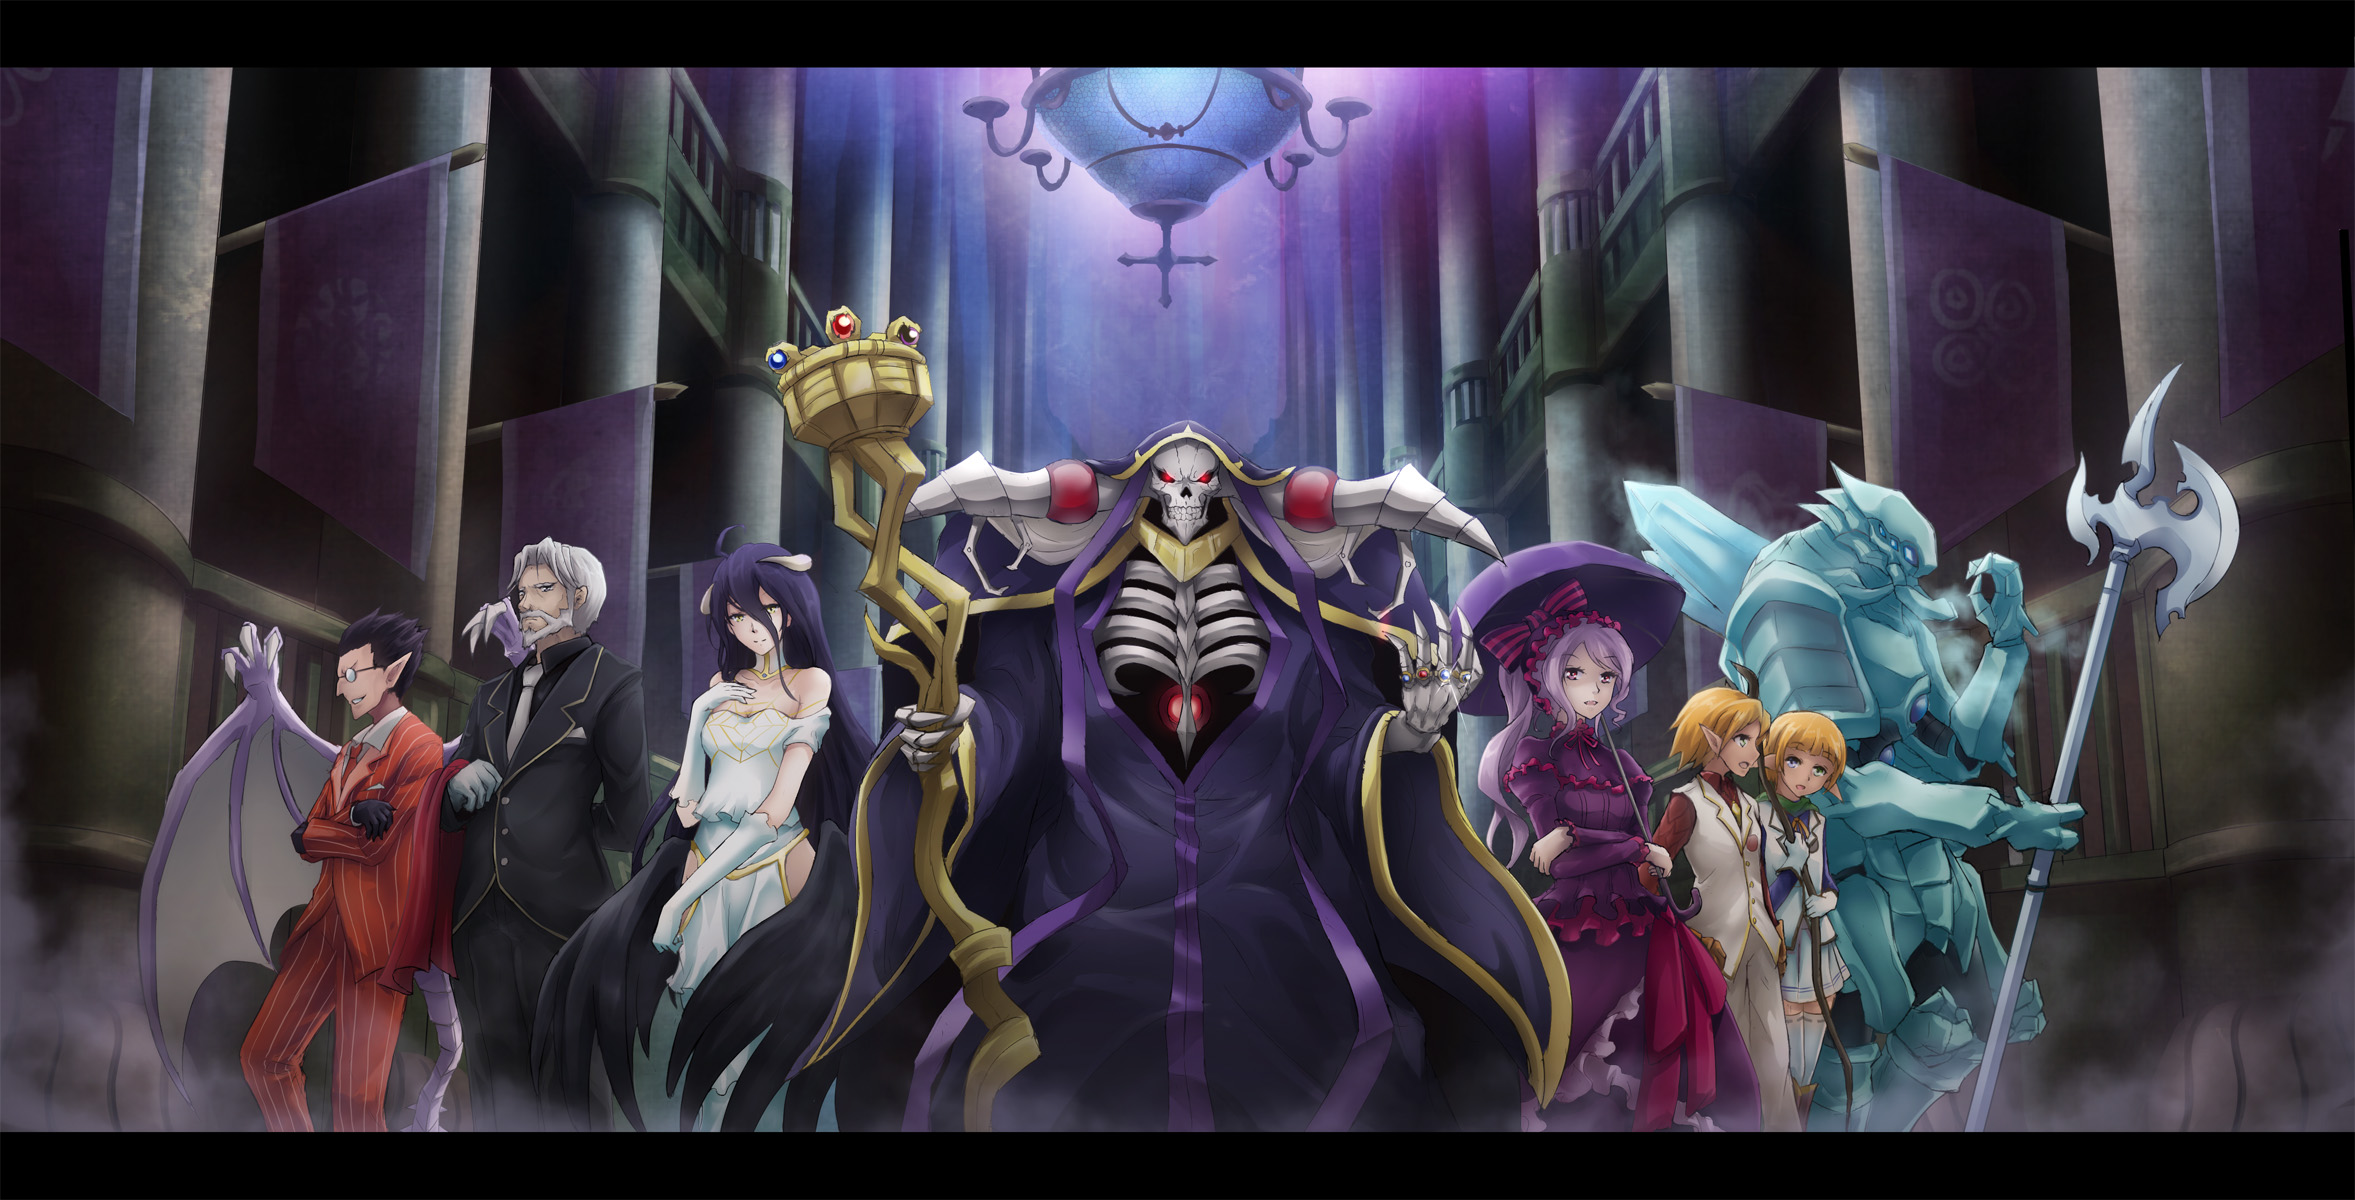 Anime Overlord HD Wallpaper | Background Image